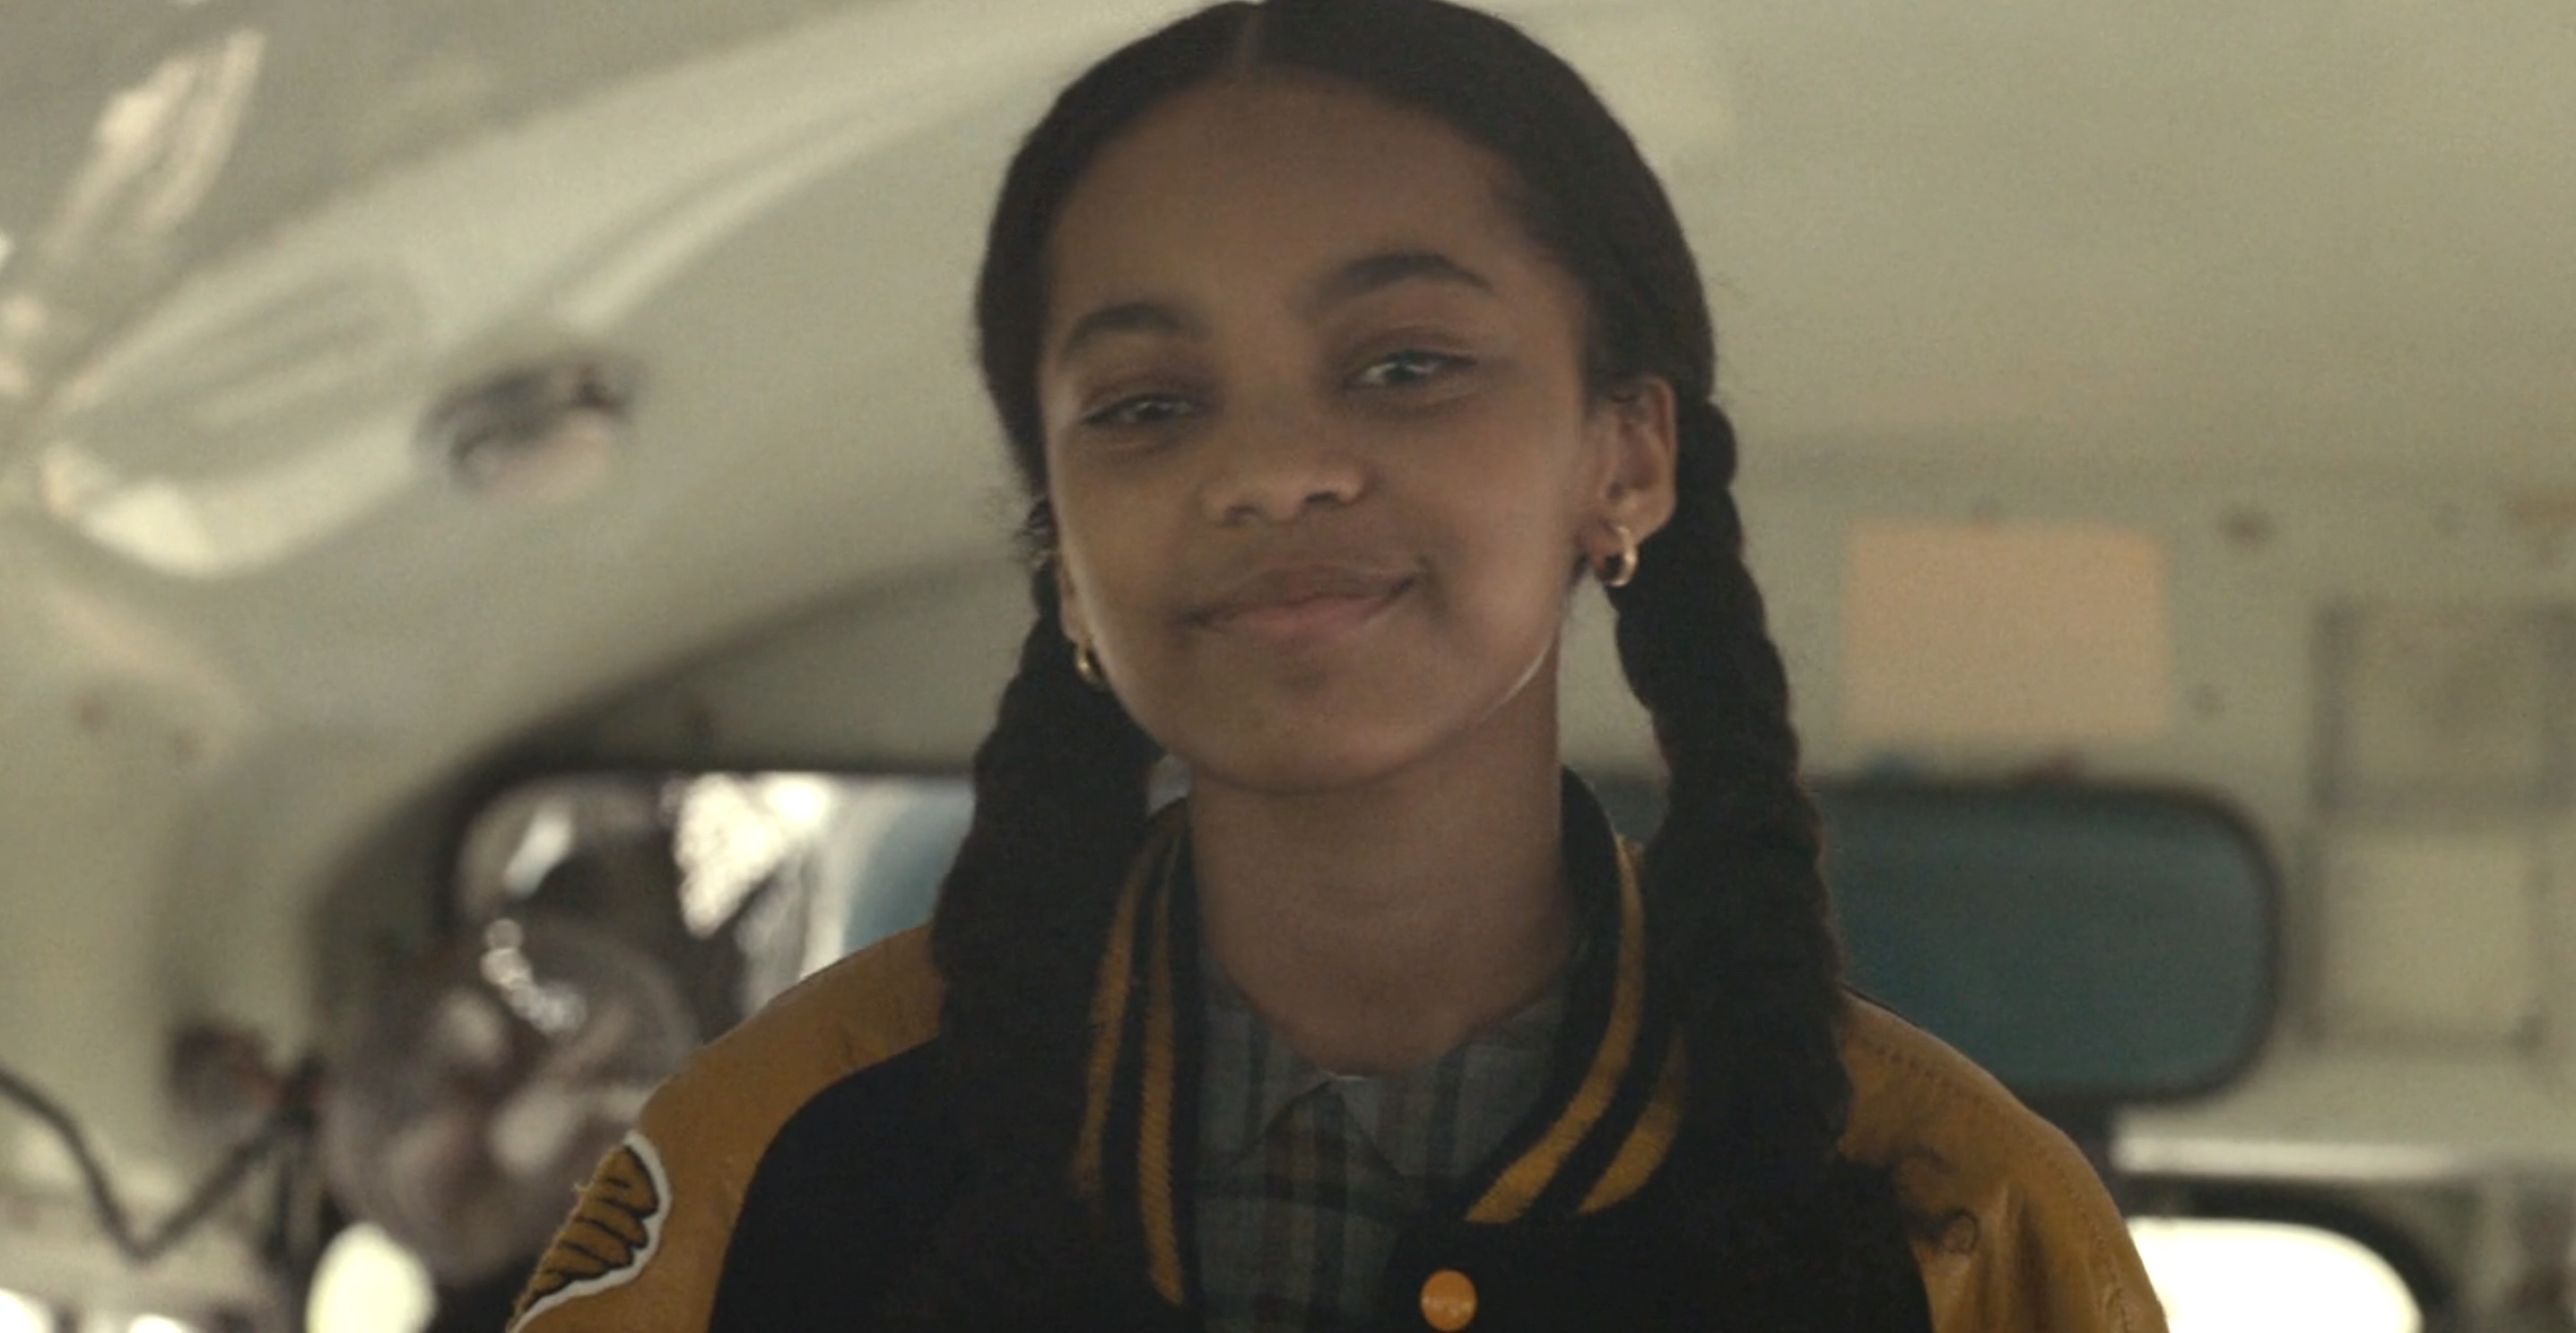 The Wonder Years Cast - Milan Ray as Keisa Clemmons